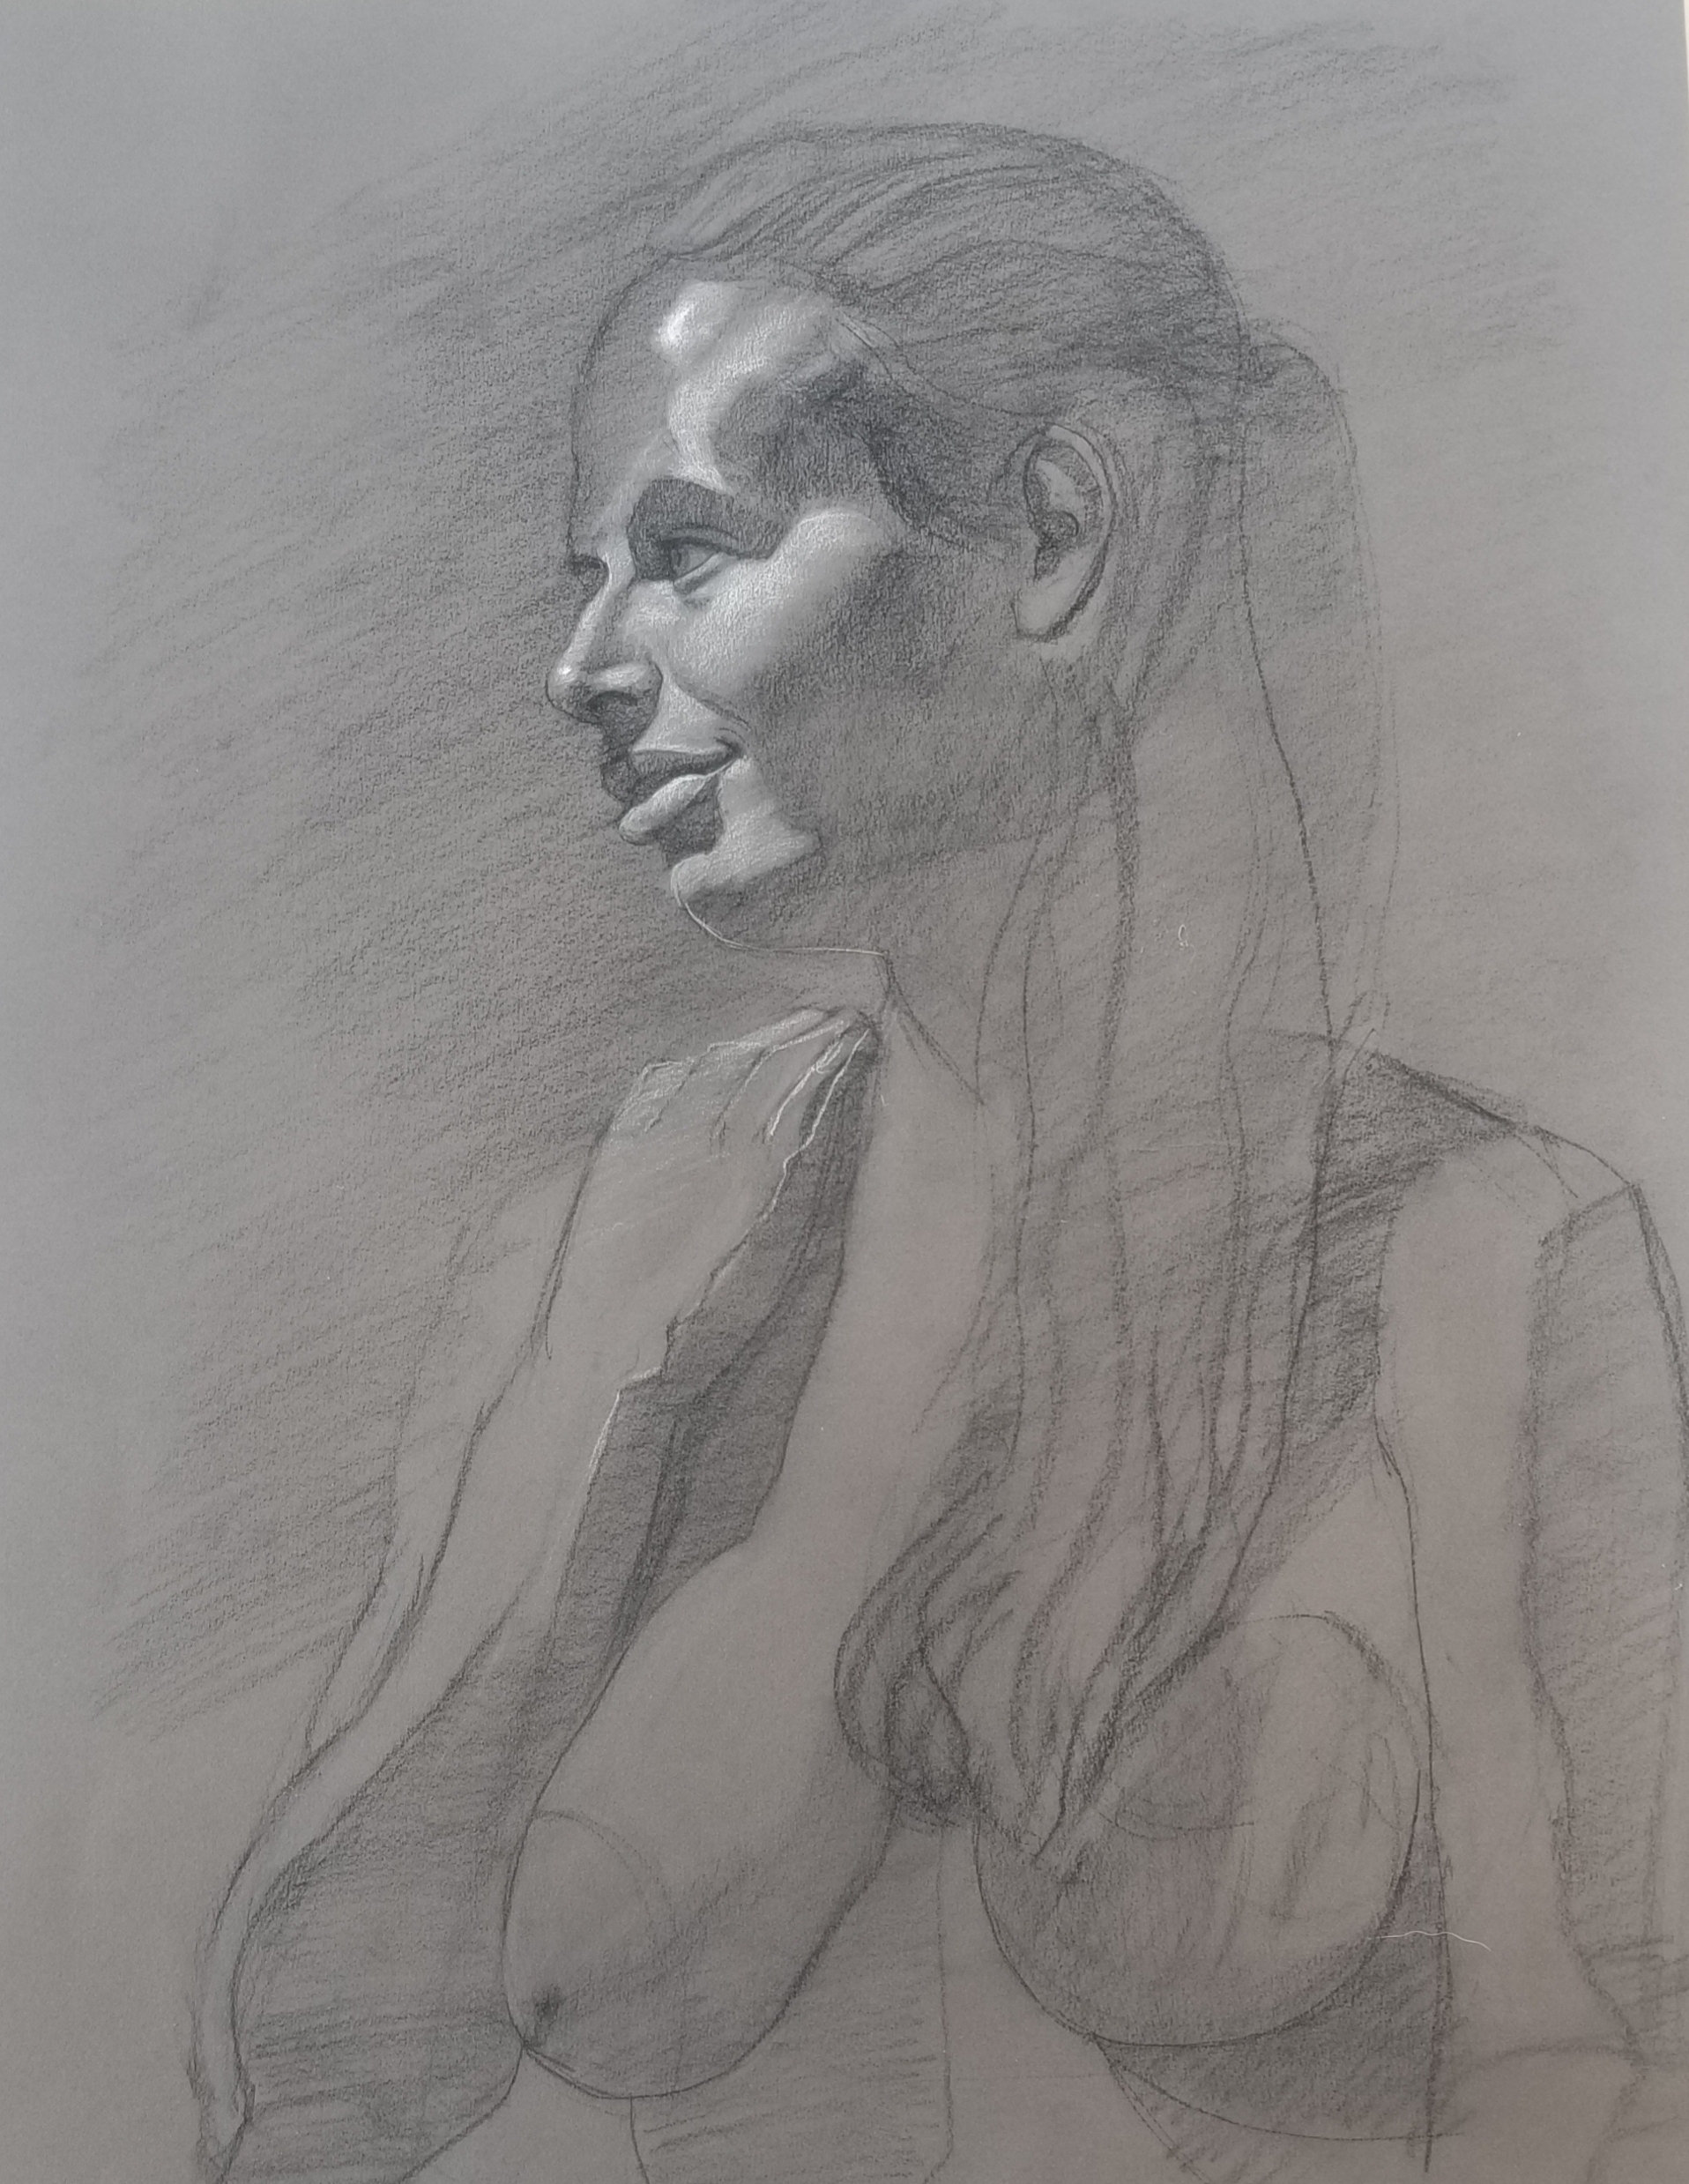  Model, charcoal and white charcoal on toned paper 18” x 20”  